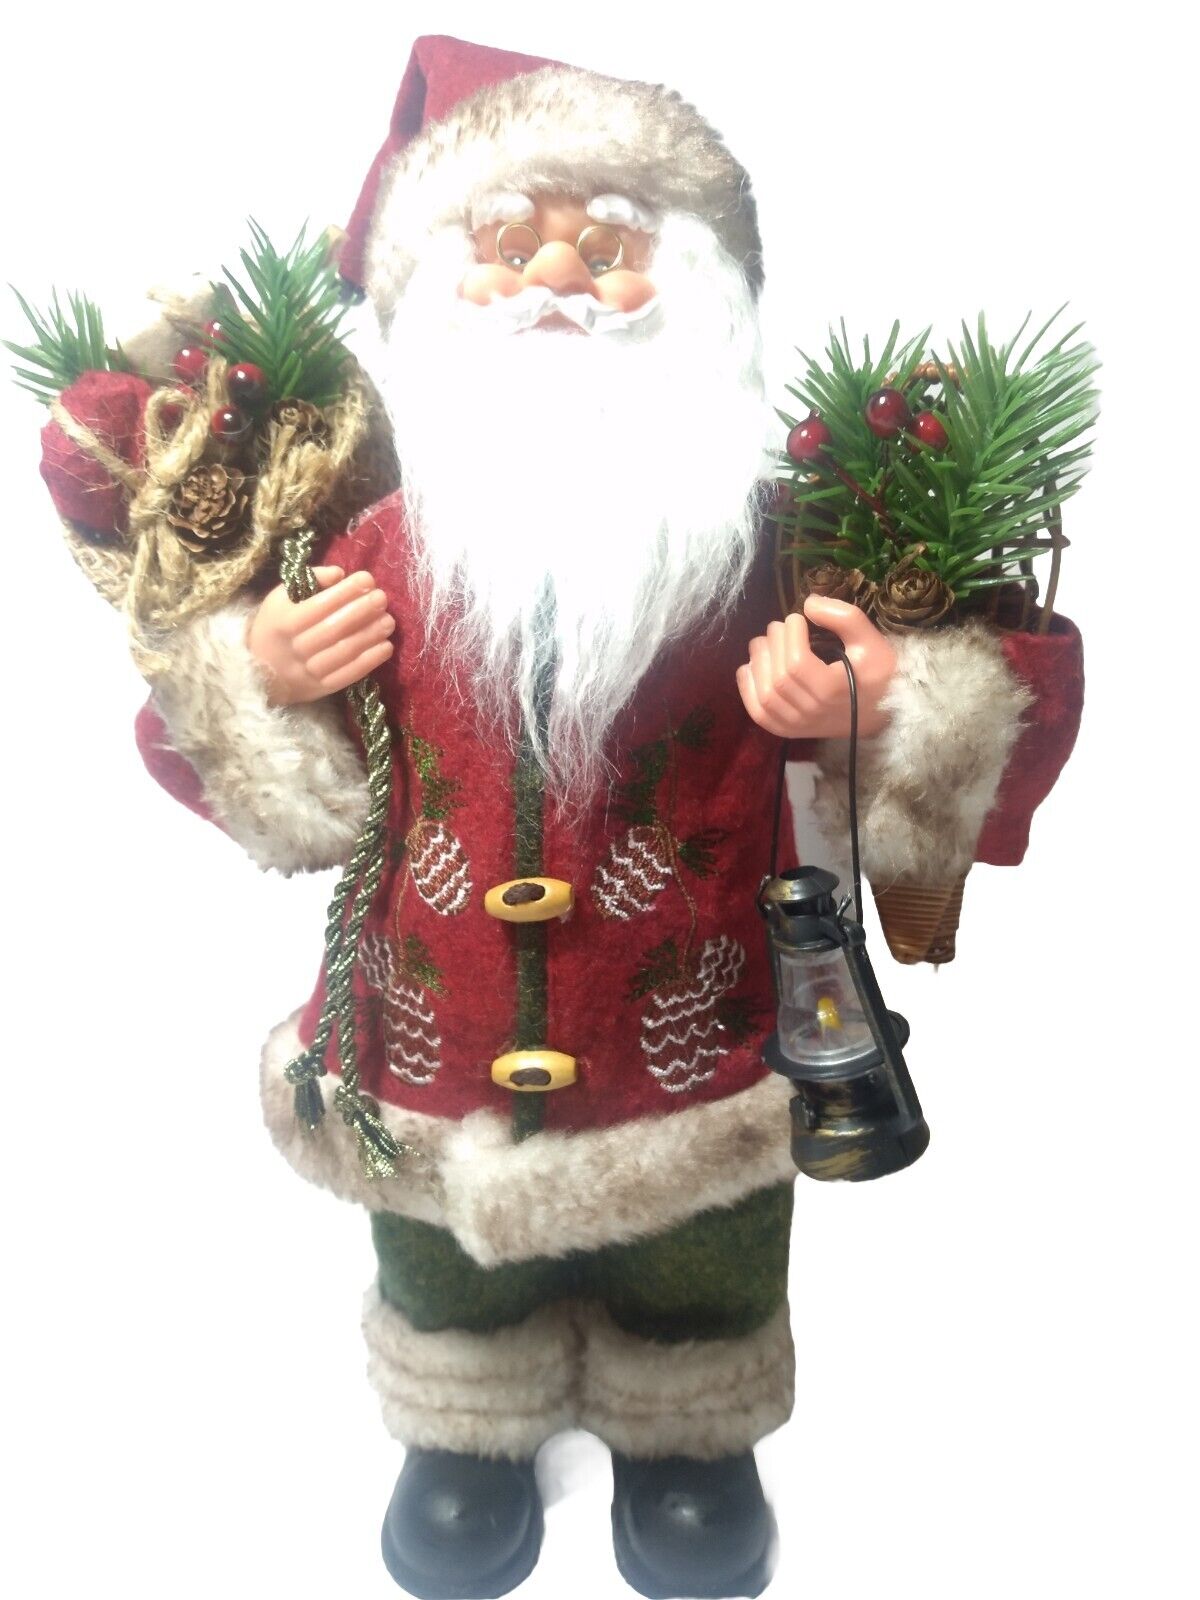 Vintage Santa Claus With Toy Bag Holding Lantern 12 inch Christmas Figure